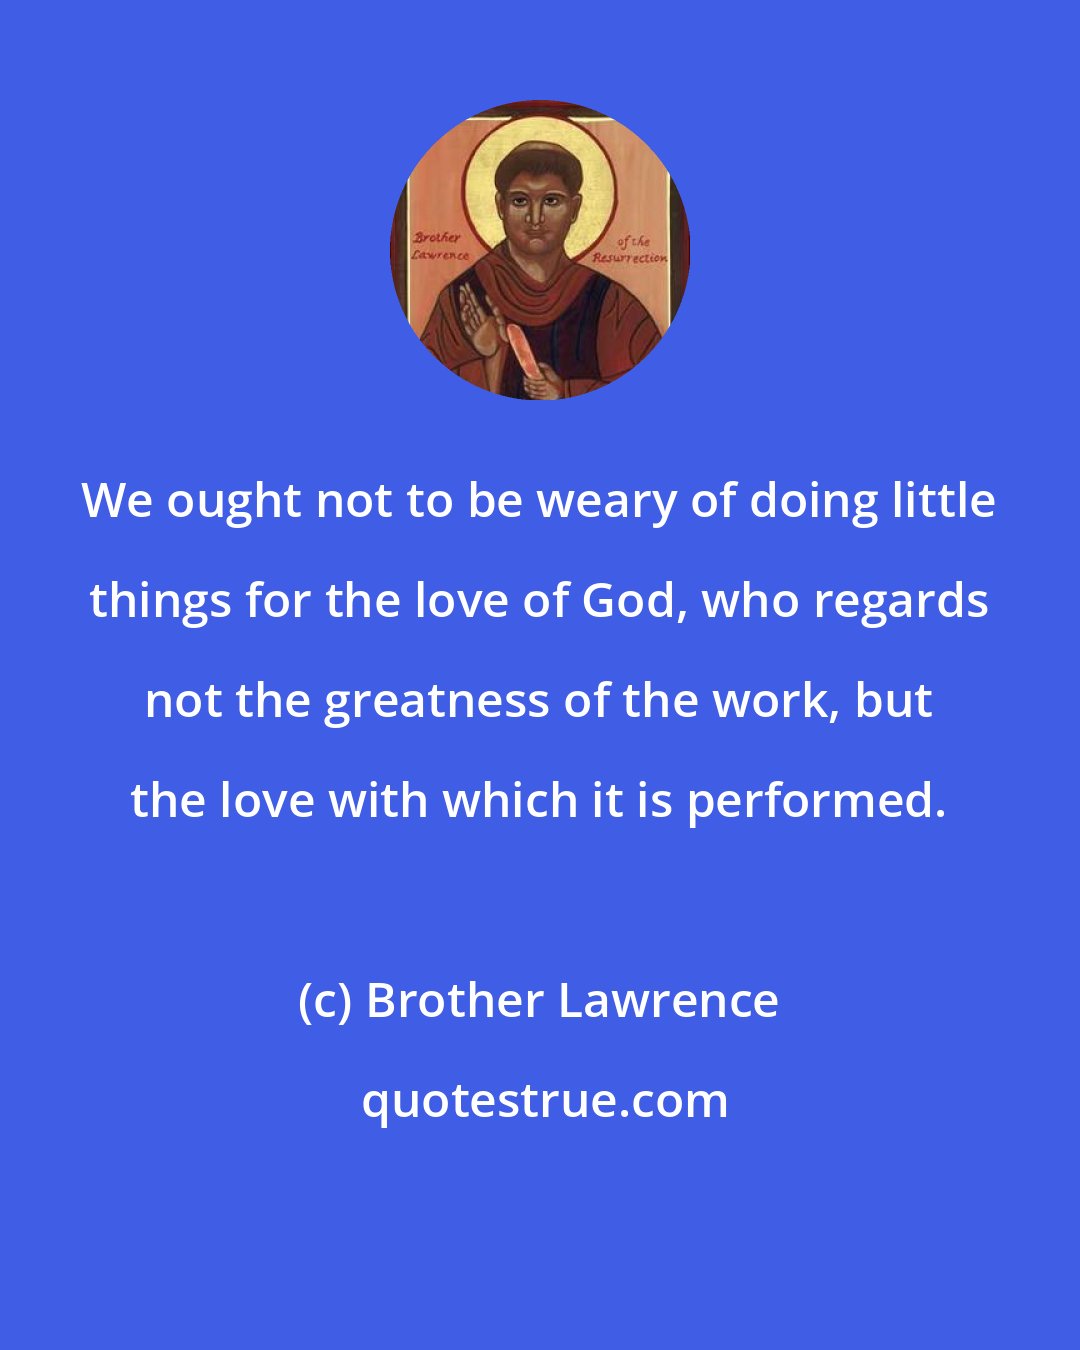 Brother Lawrence: We ought not to be weary of doing little things for the love of God, who regards not the greatness of the work, but the love with which it is performed.